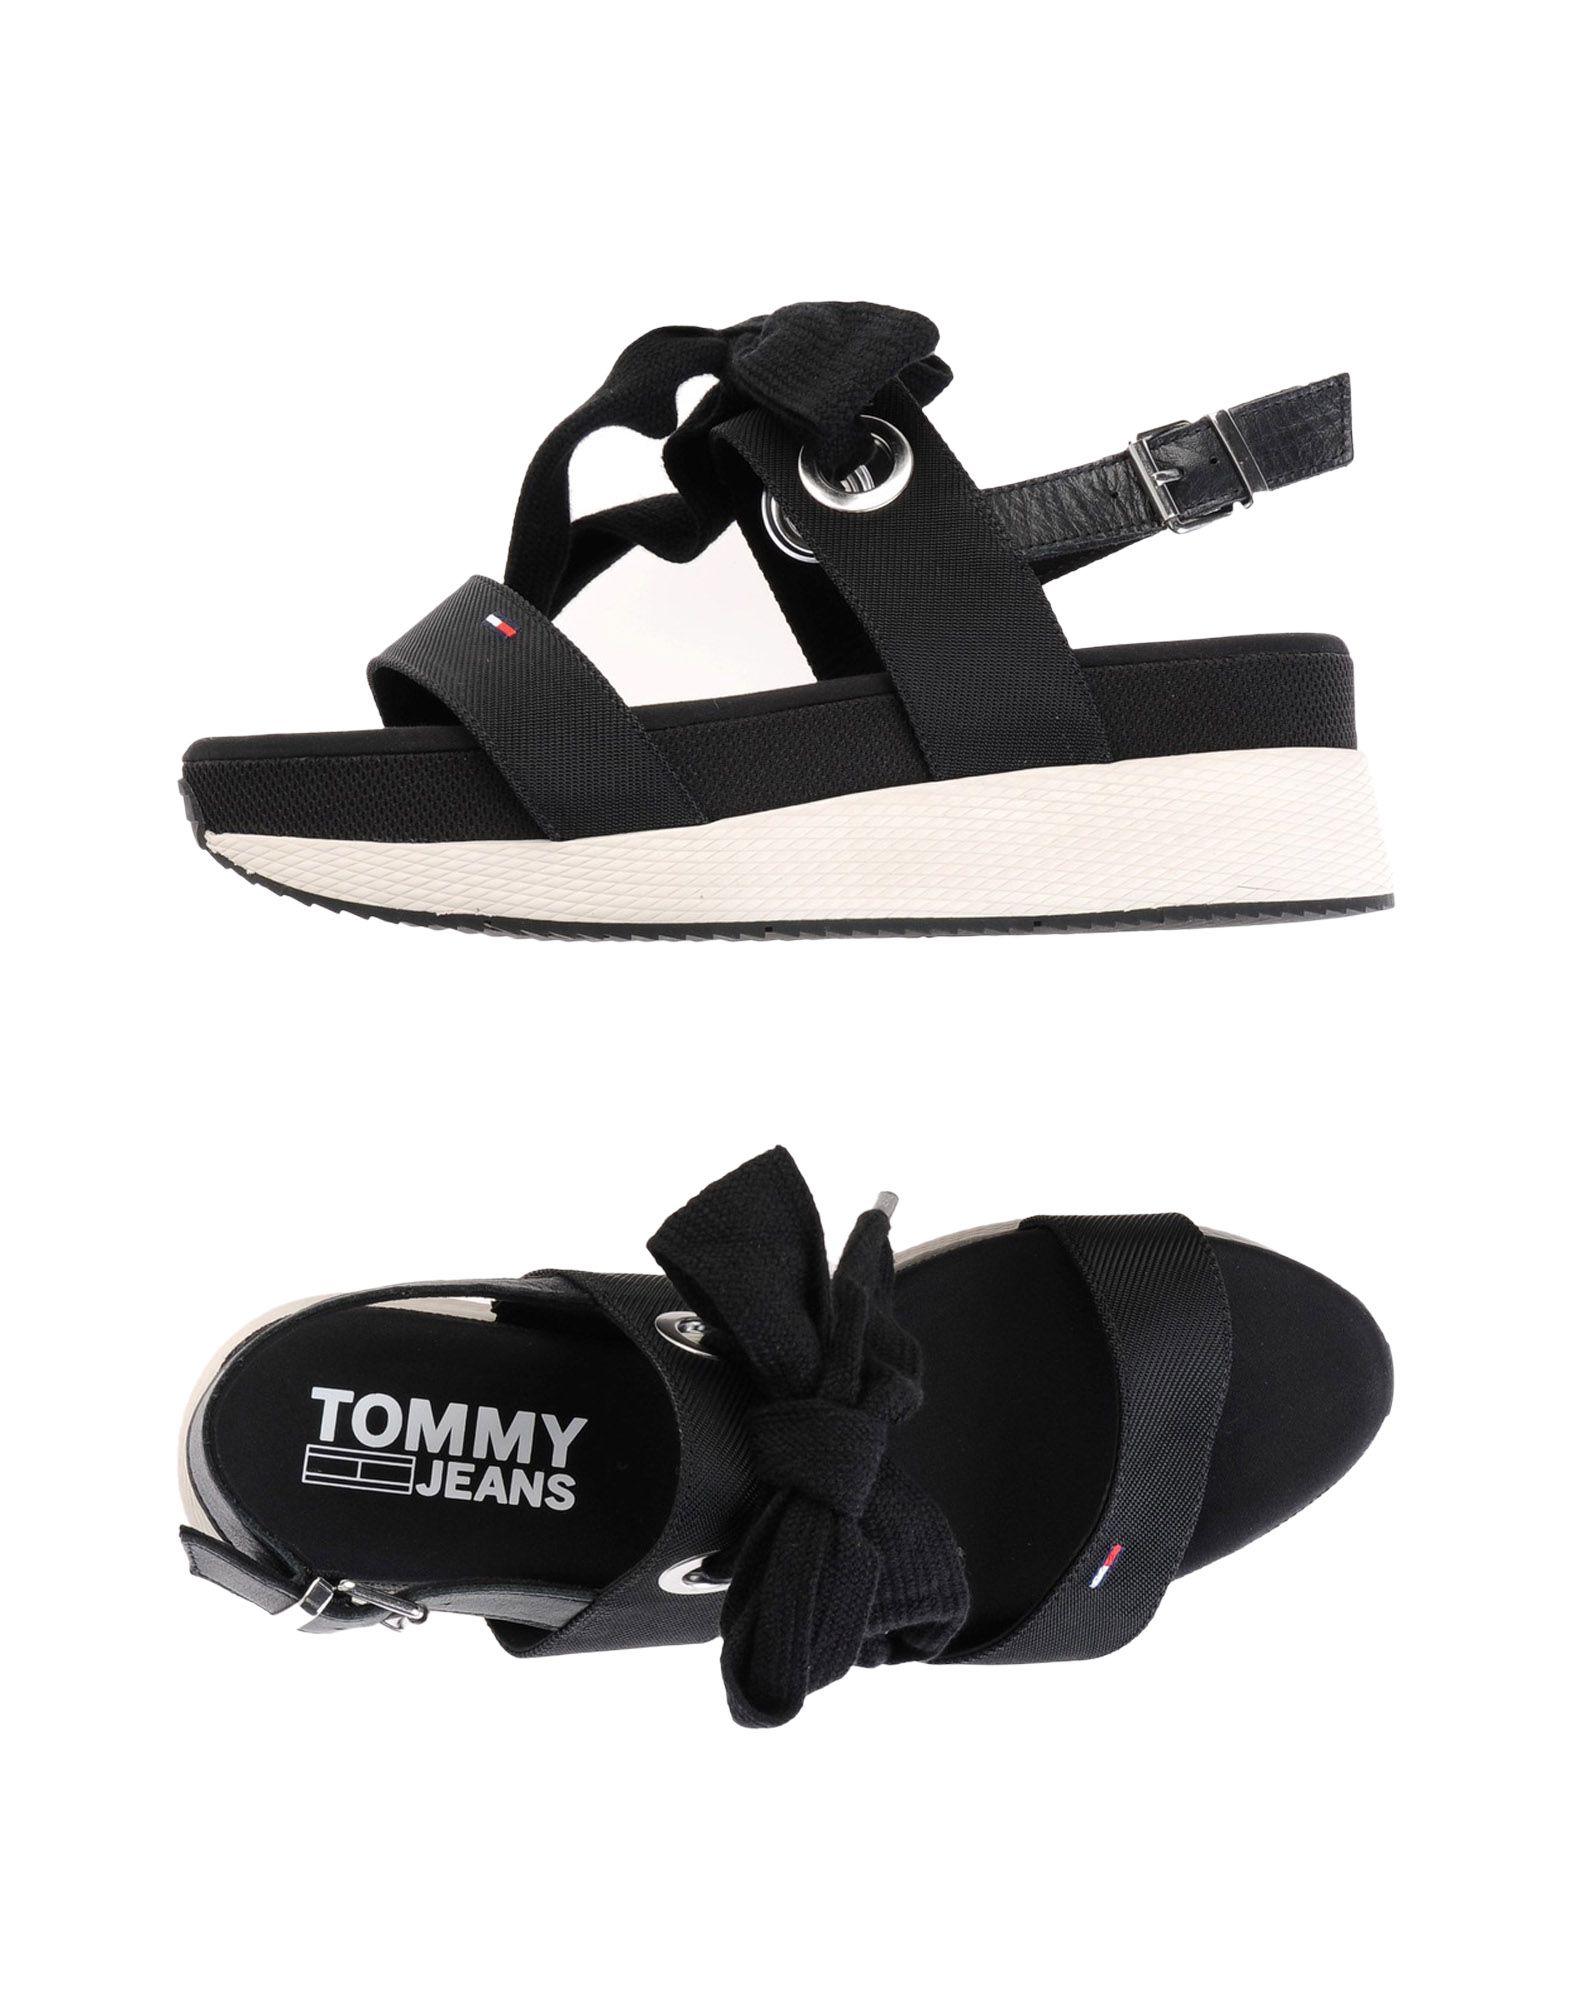 TOMMY JEANS Sandals,11476548OK 13